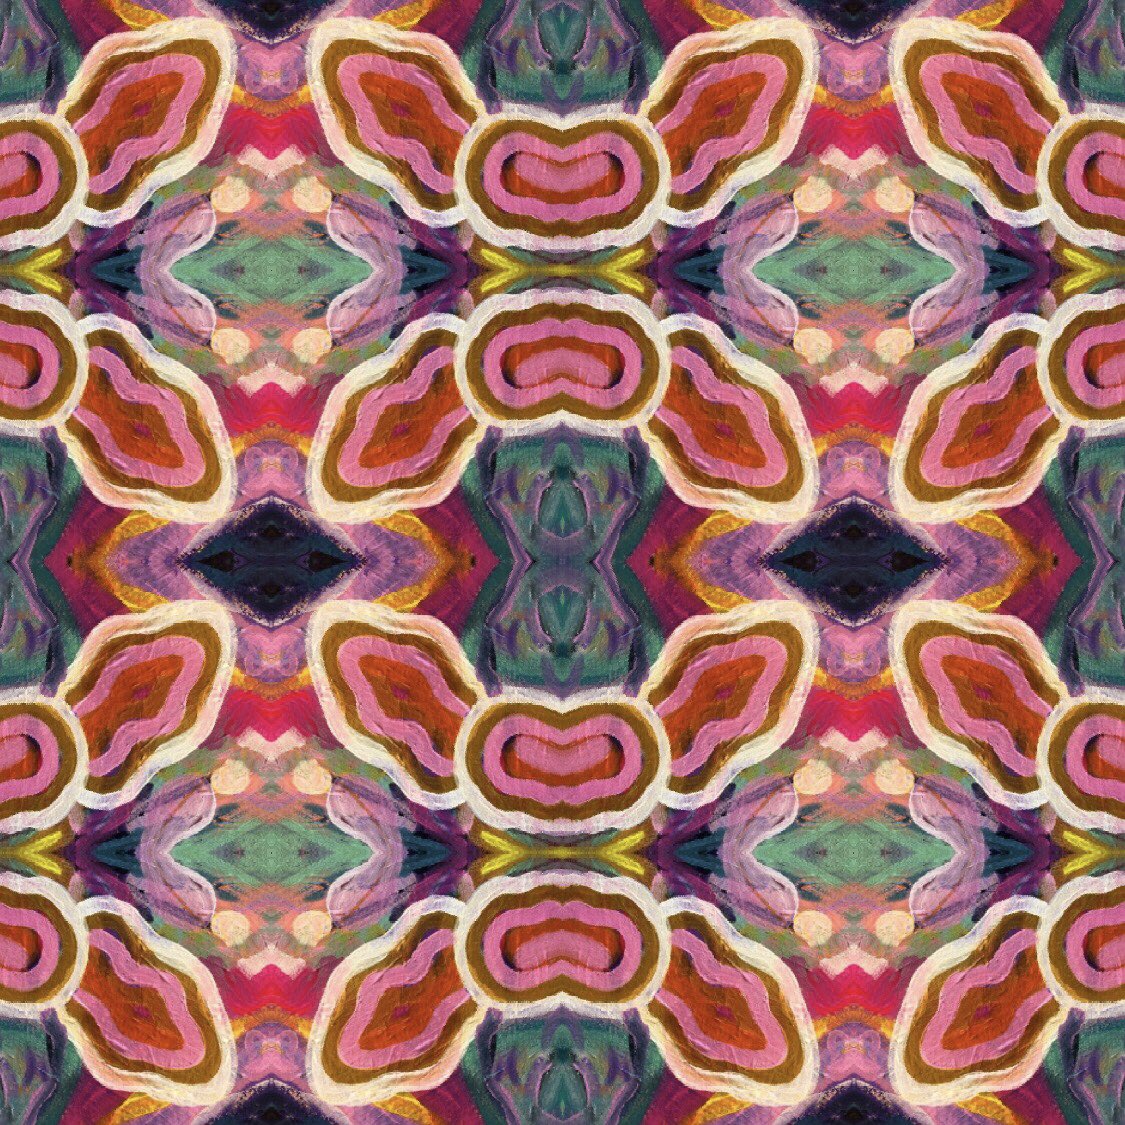 GM! Patternplay first up today 🪸 #painting #to #pattern #bracket #fungi #analogue #to #digital #art